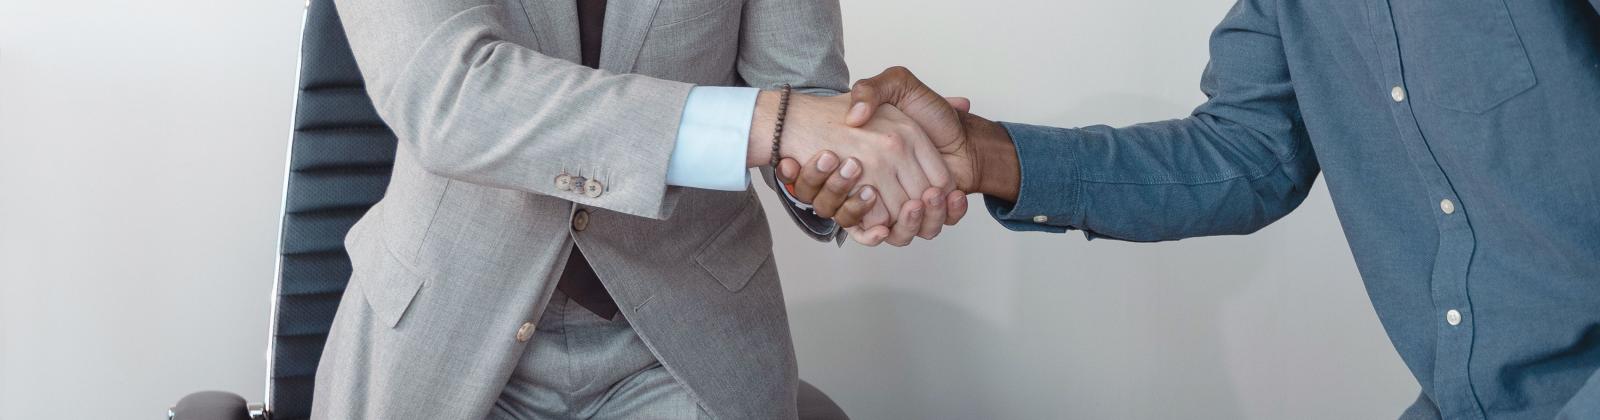 Two people engaging in a handshake